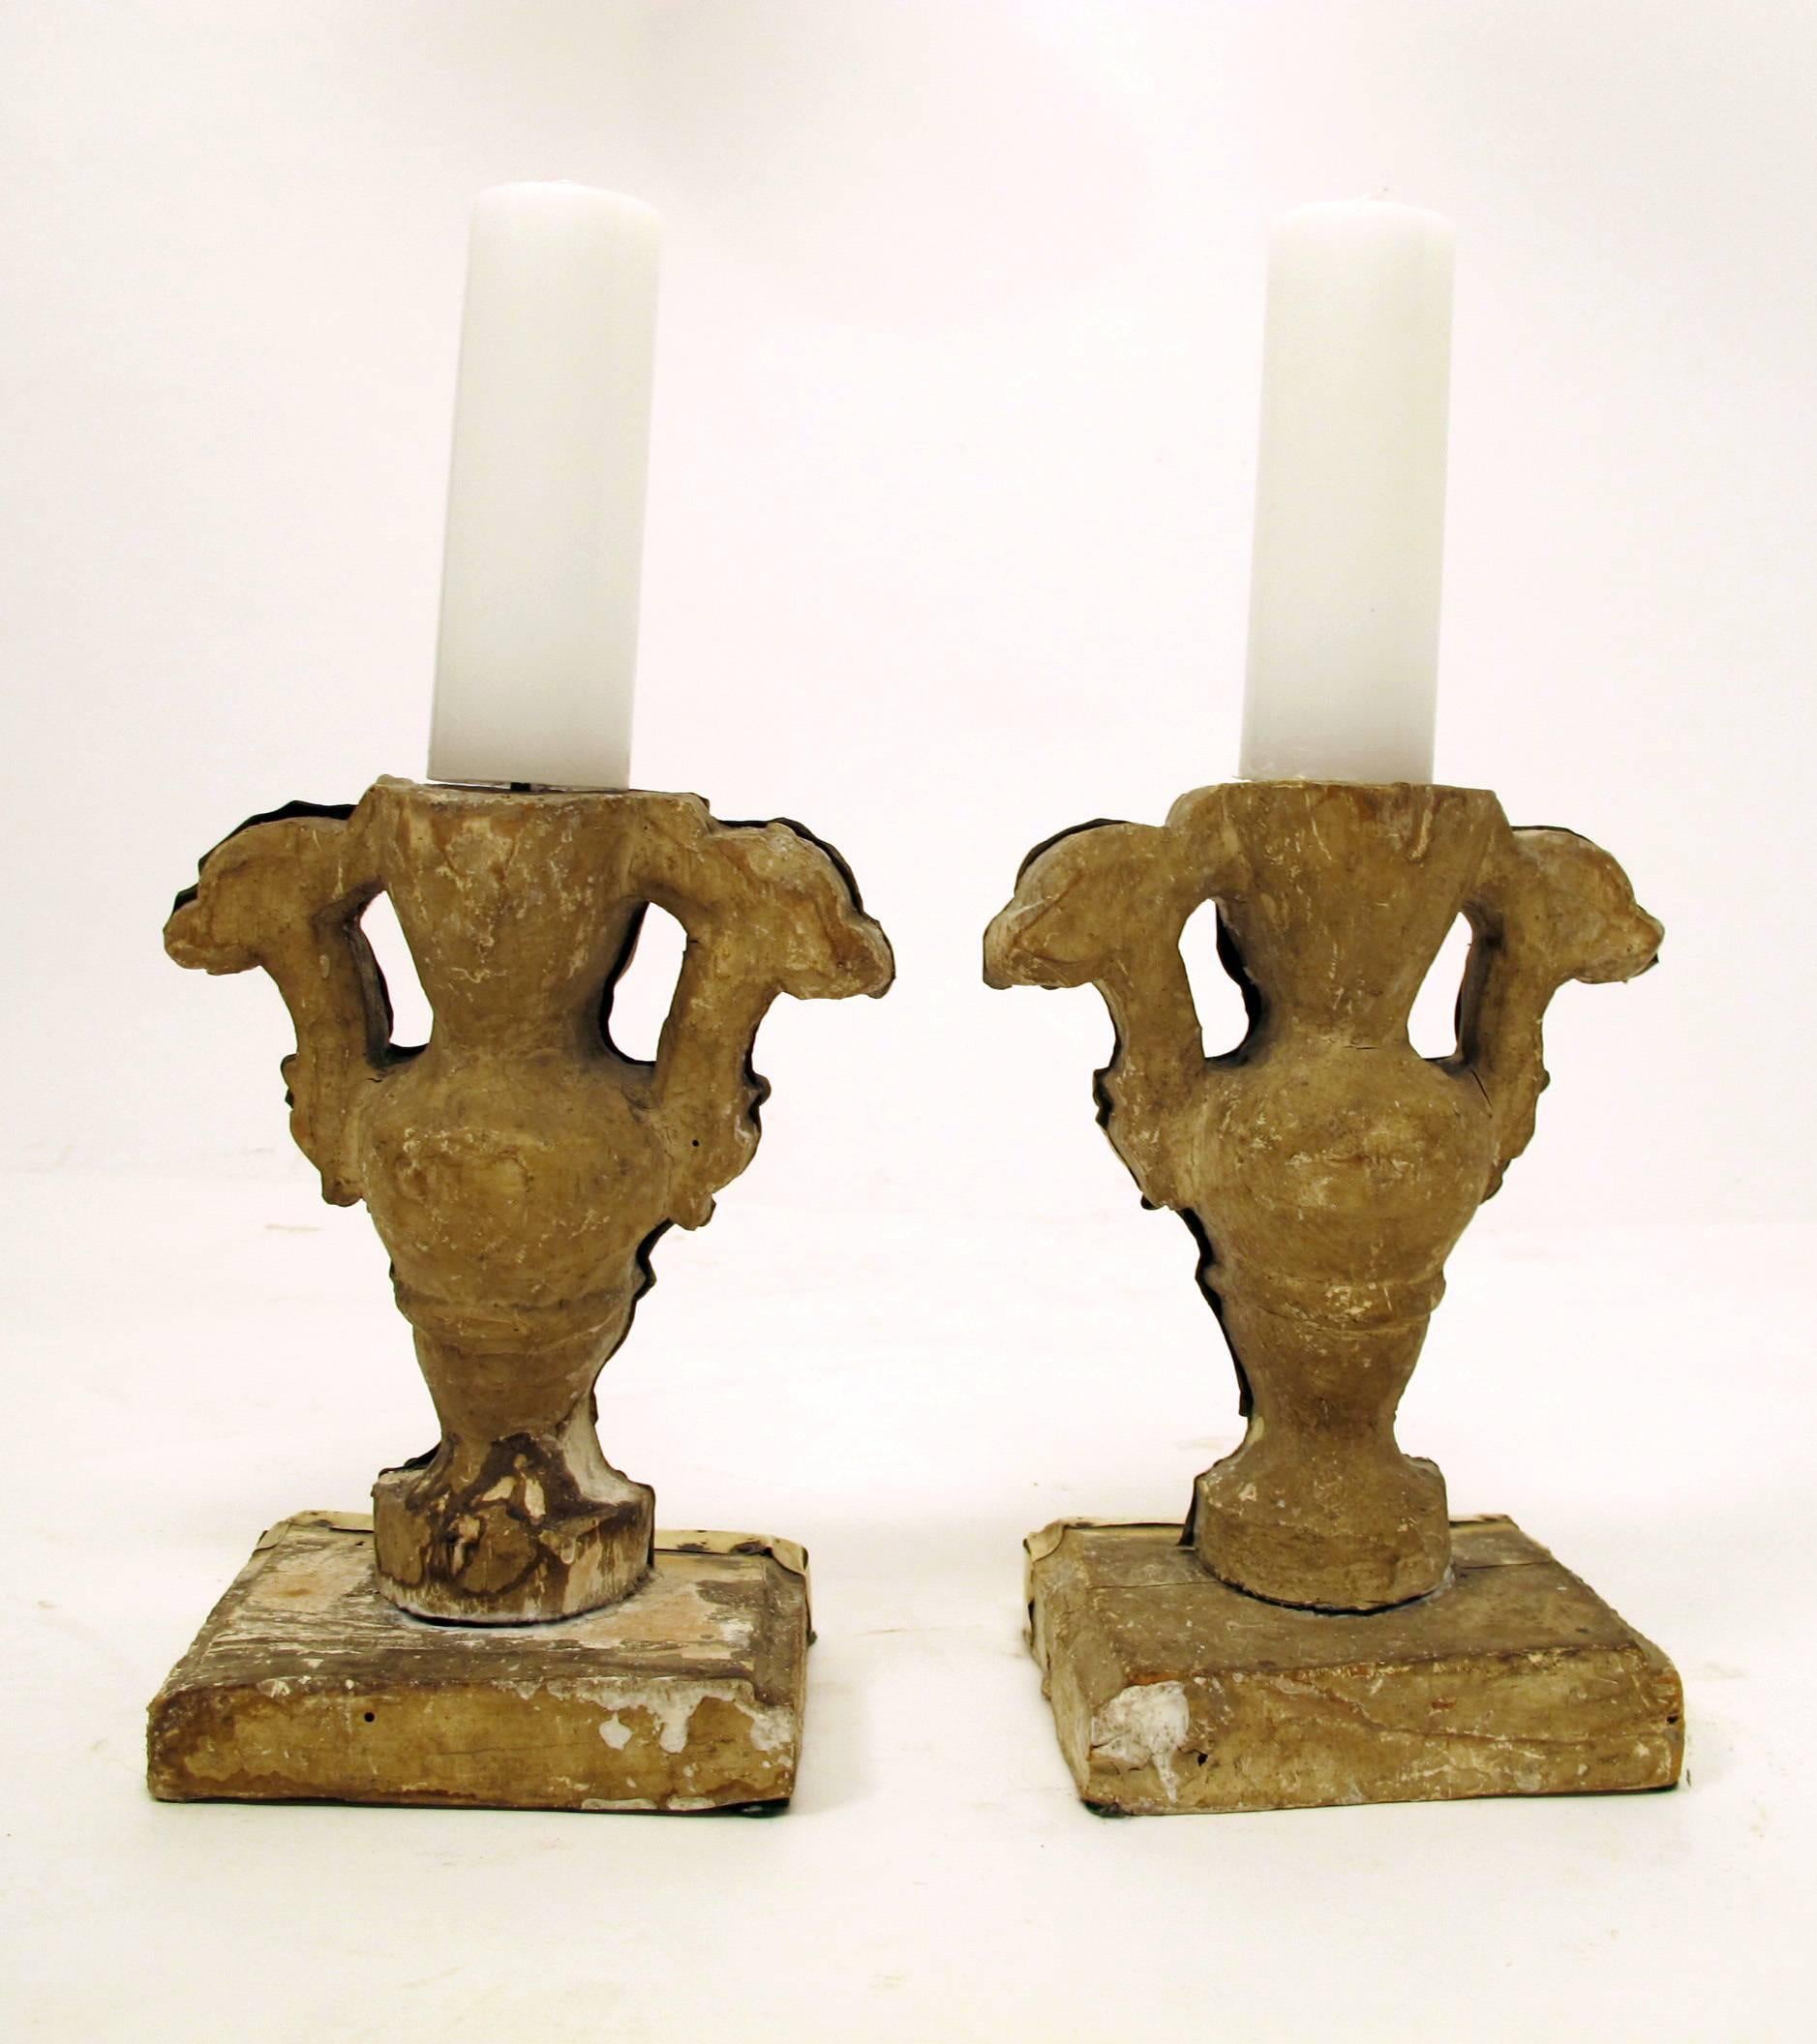 Pair of 18th Century Italian Wood and Brass Pricket Candleholders For Sale 3